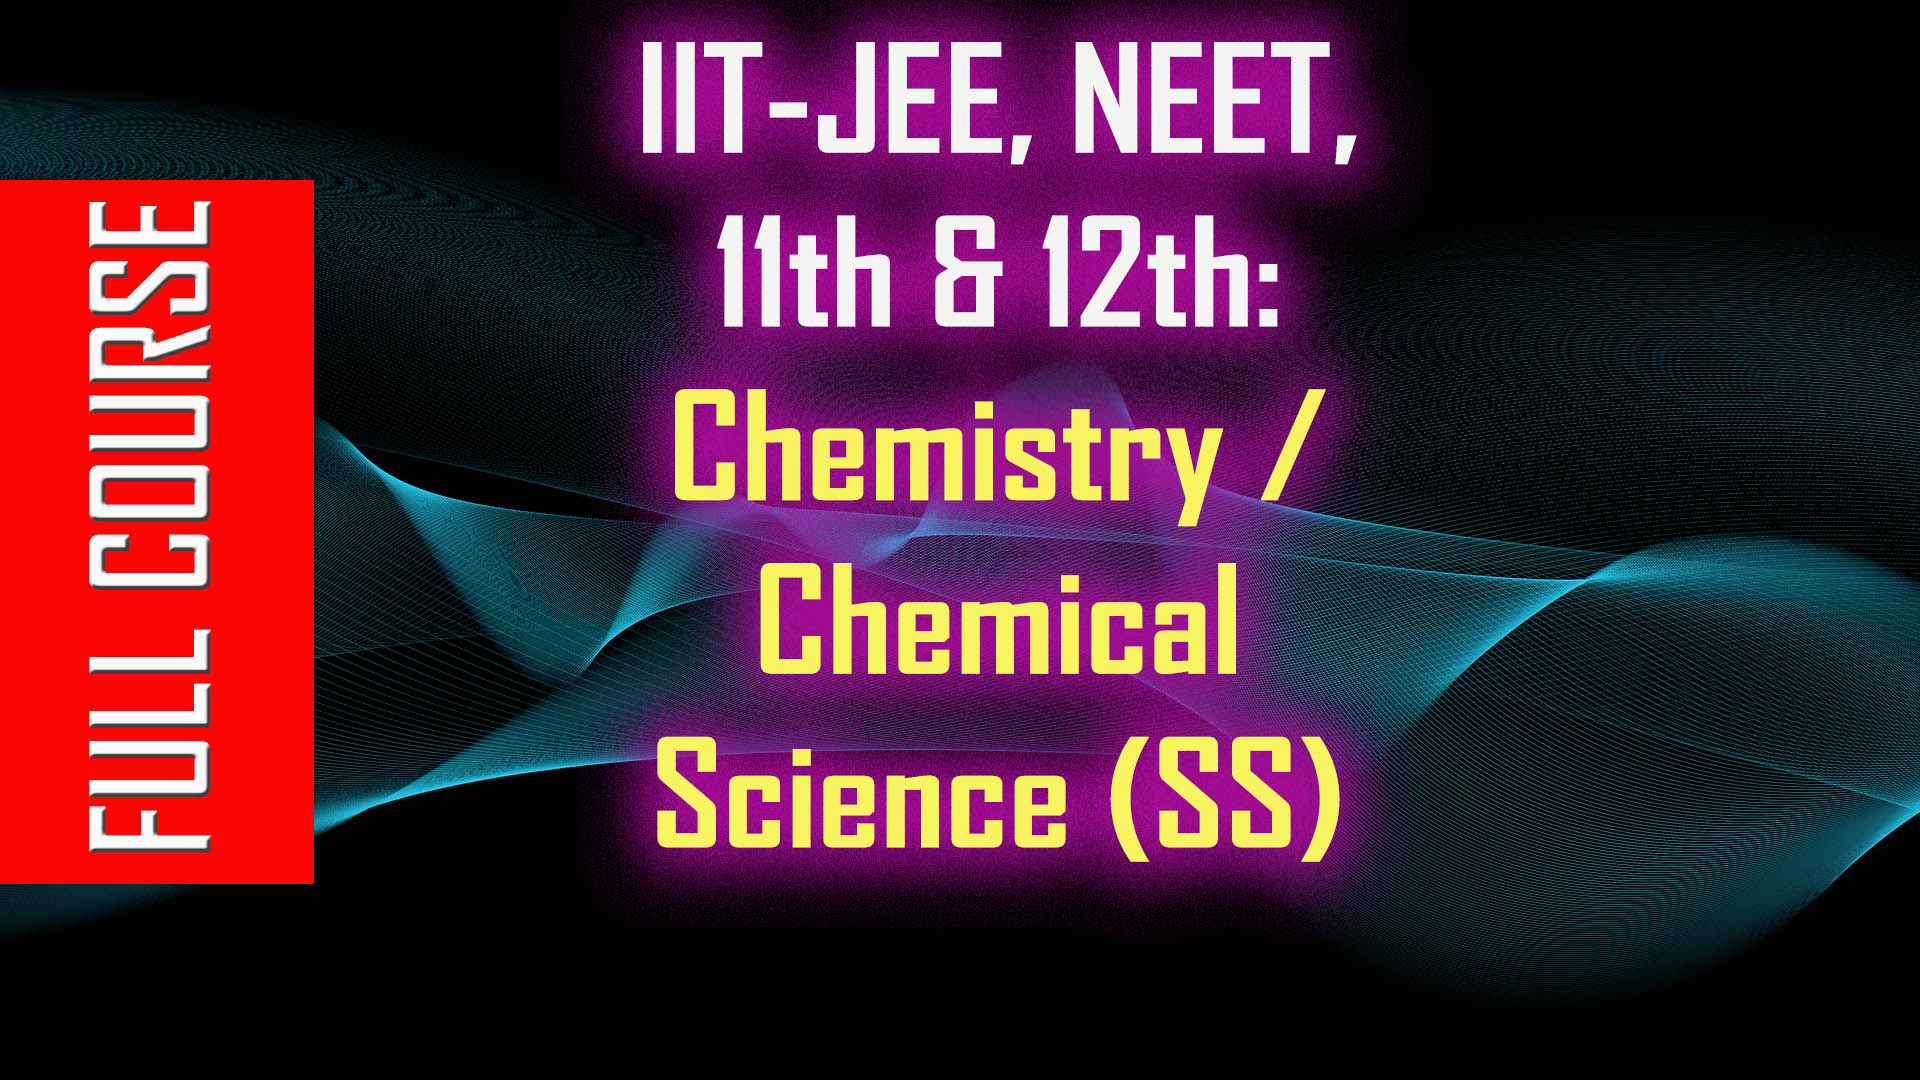 IIT-JEE, NEET, 11th & 12th: Chemistry / Chemical Science (SS)